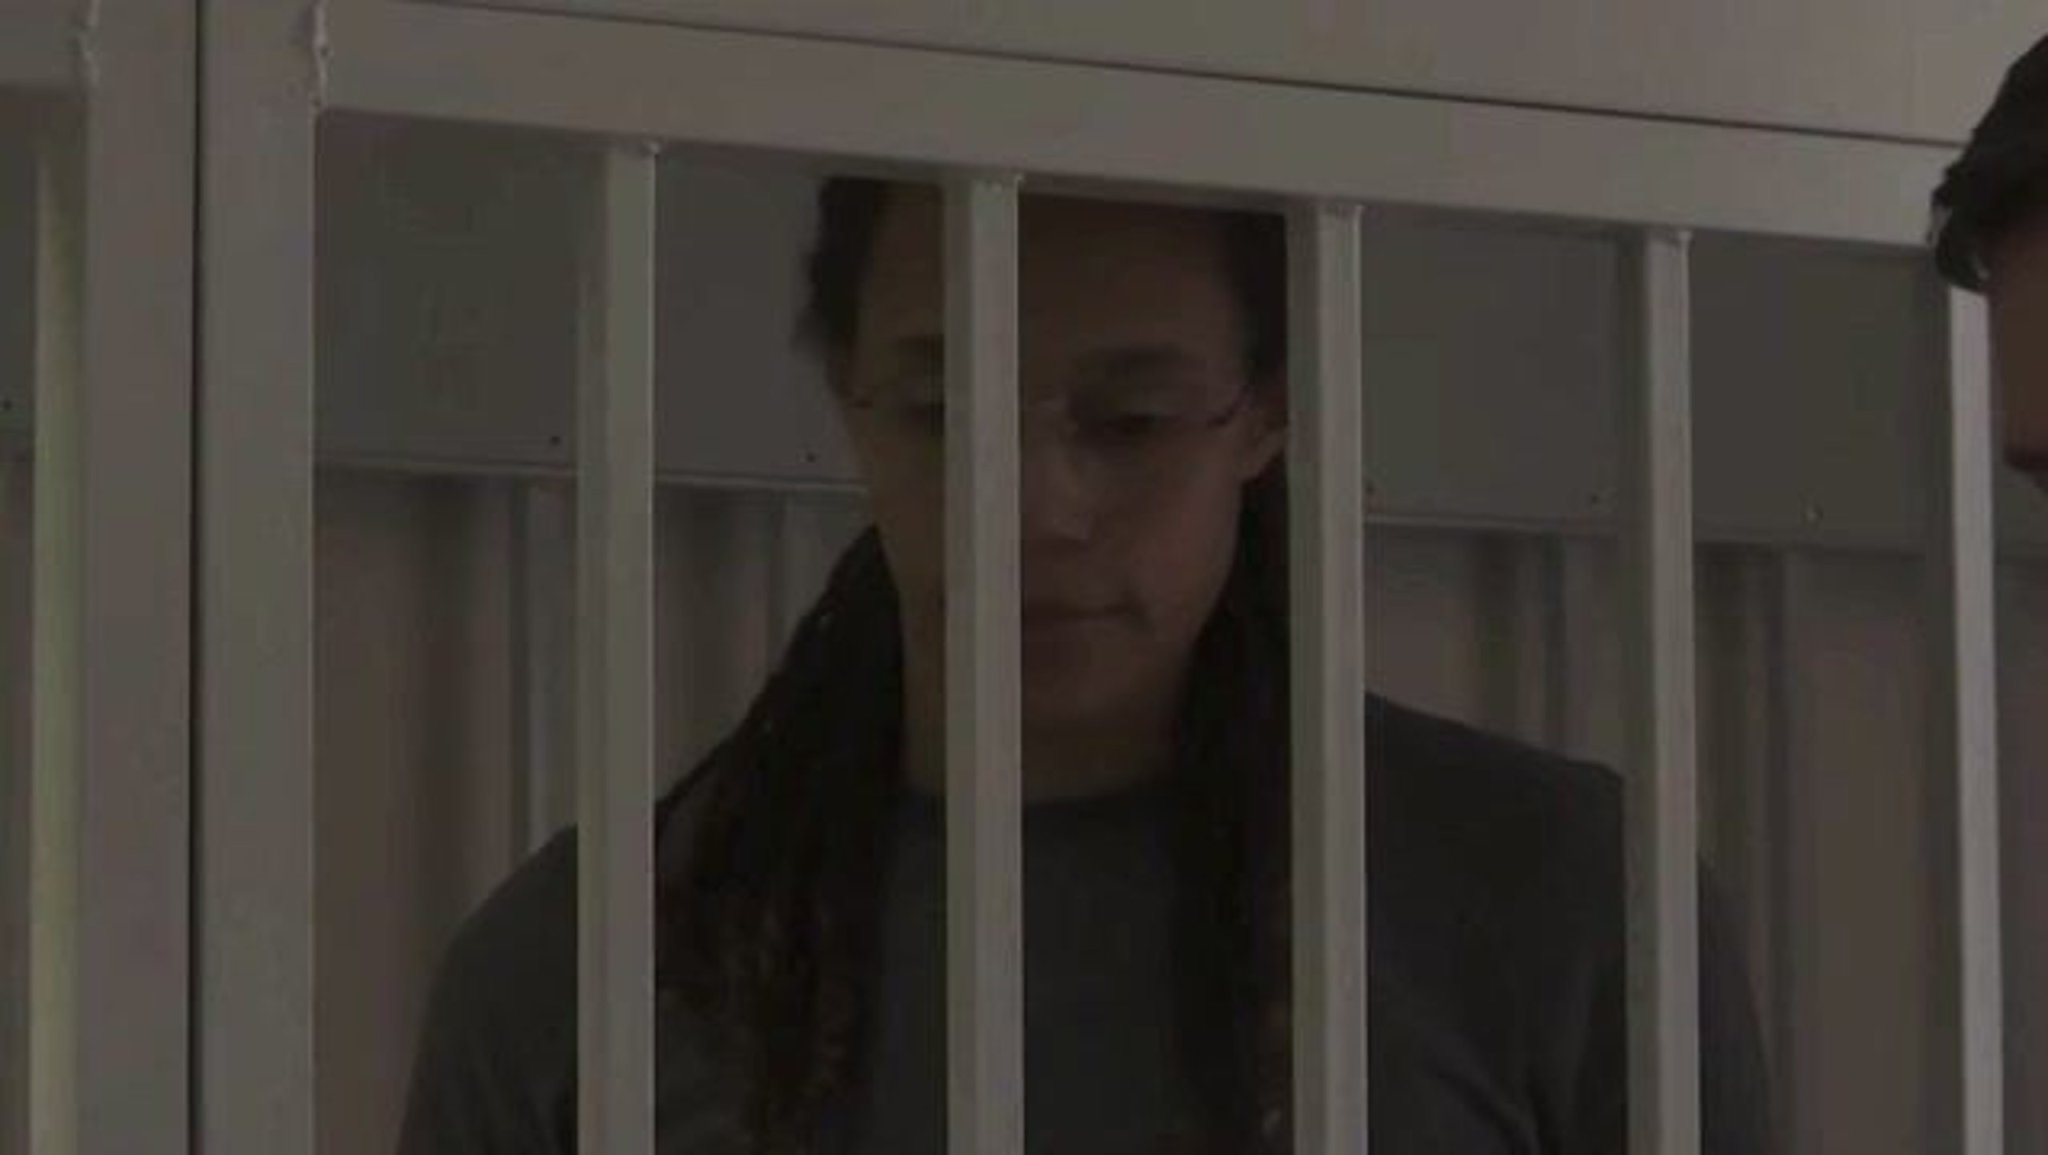 Take 8 minutes to watch WNBA star Brittney Griner's testimony from a jail cell ahead of her sentencing in Russian court.